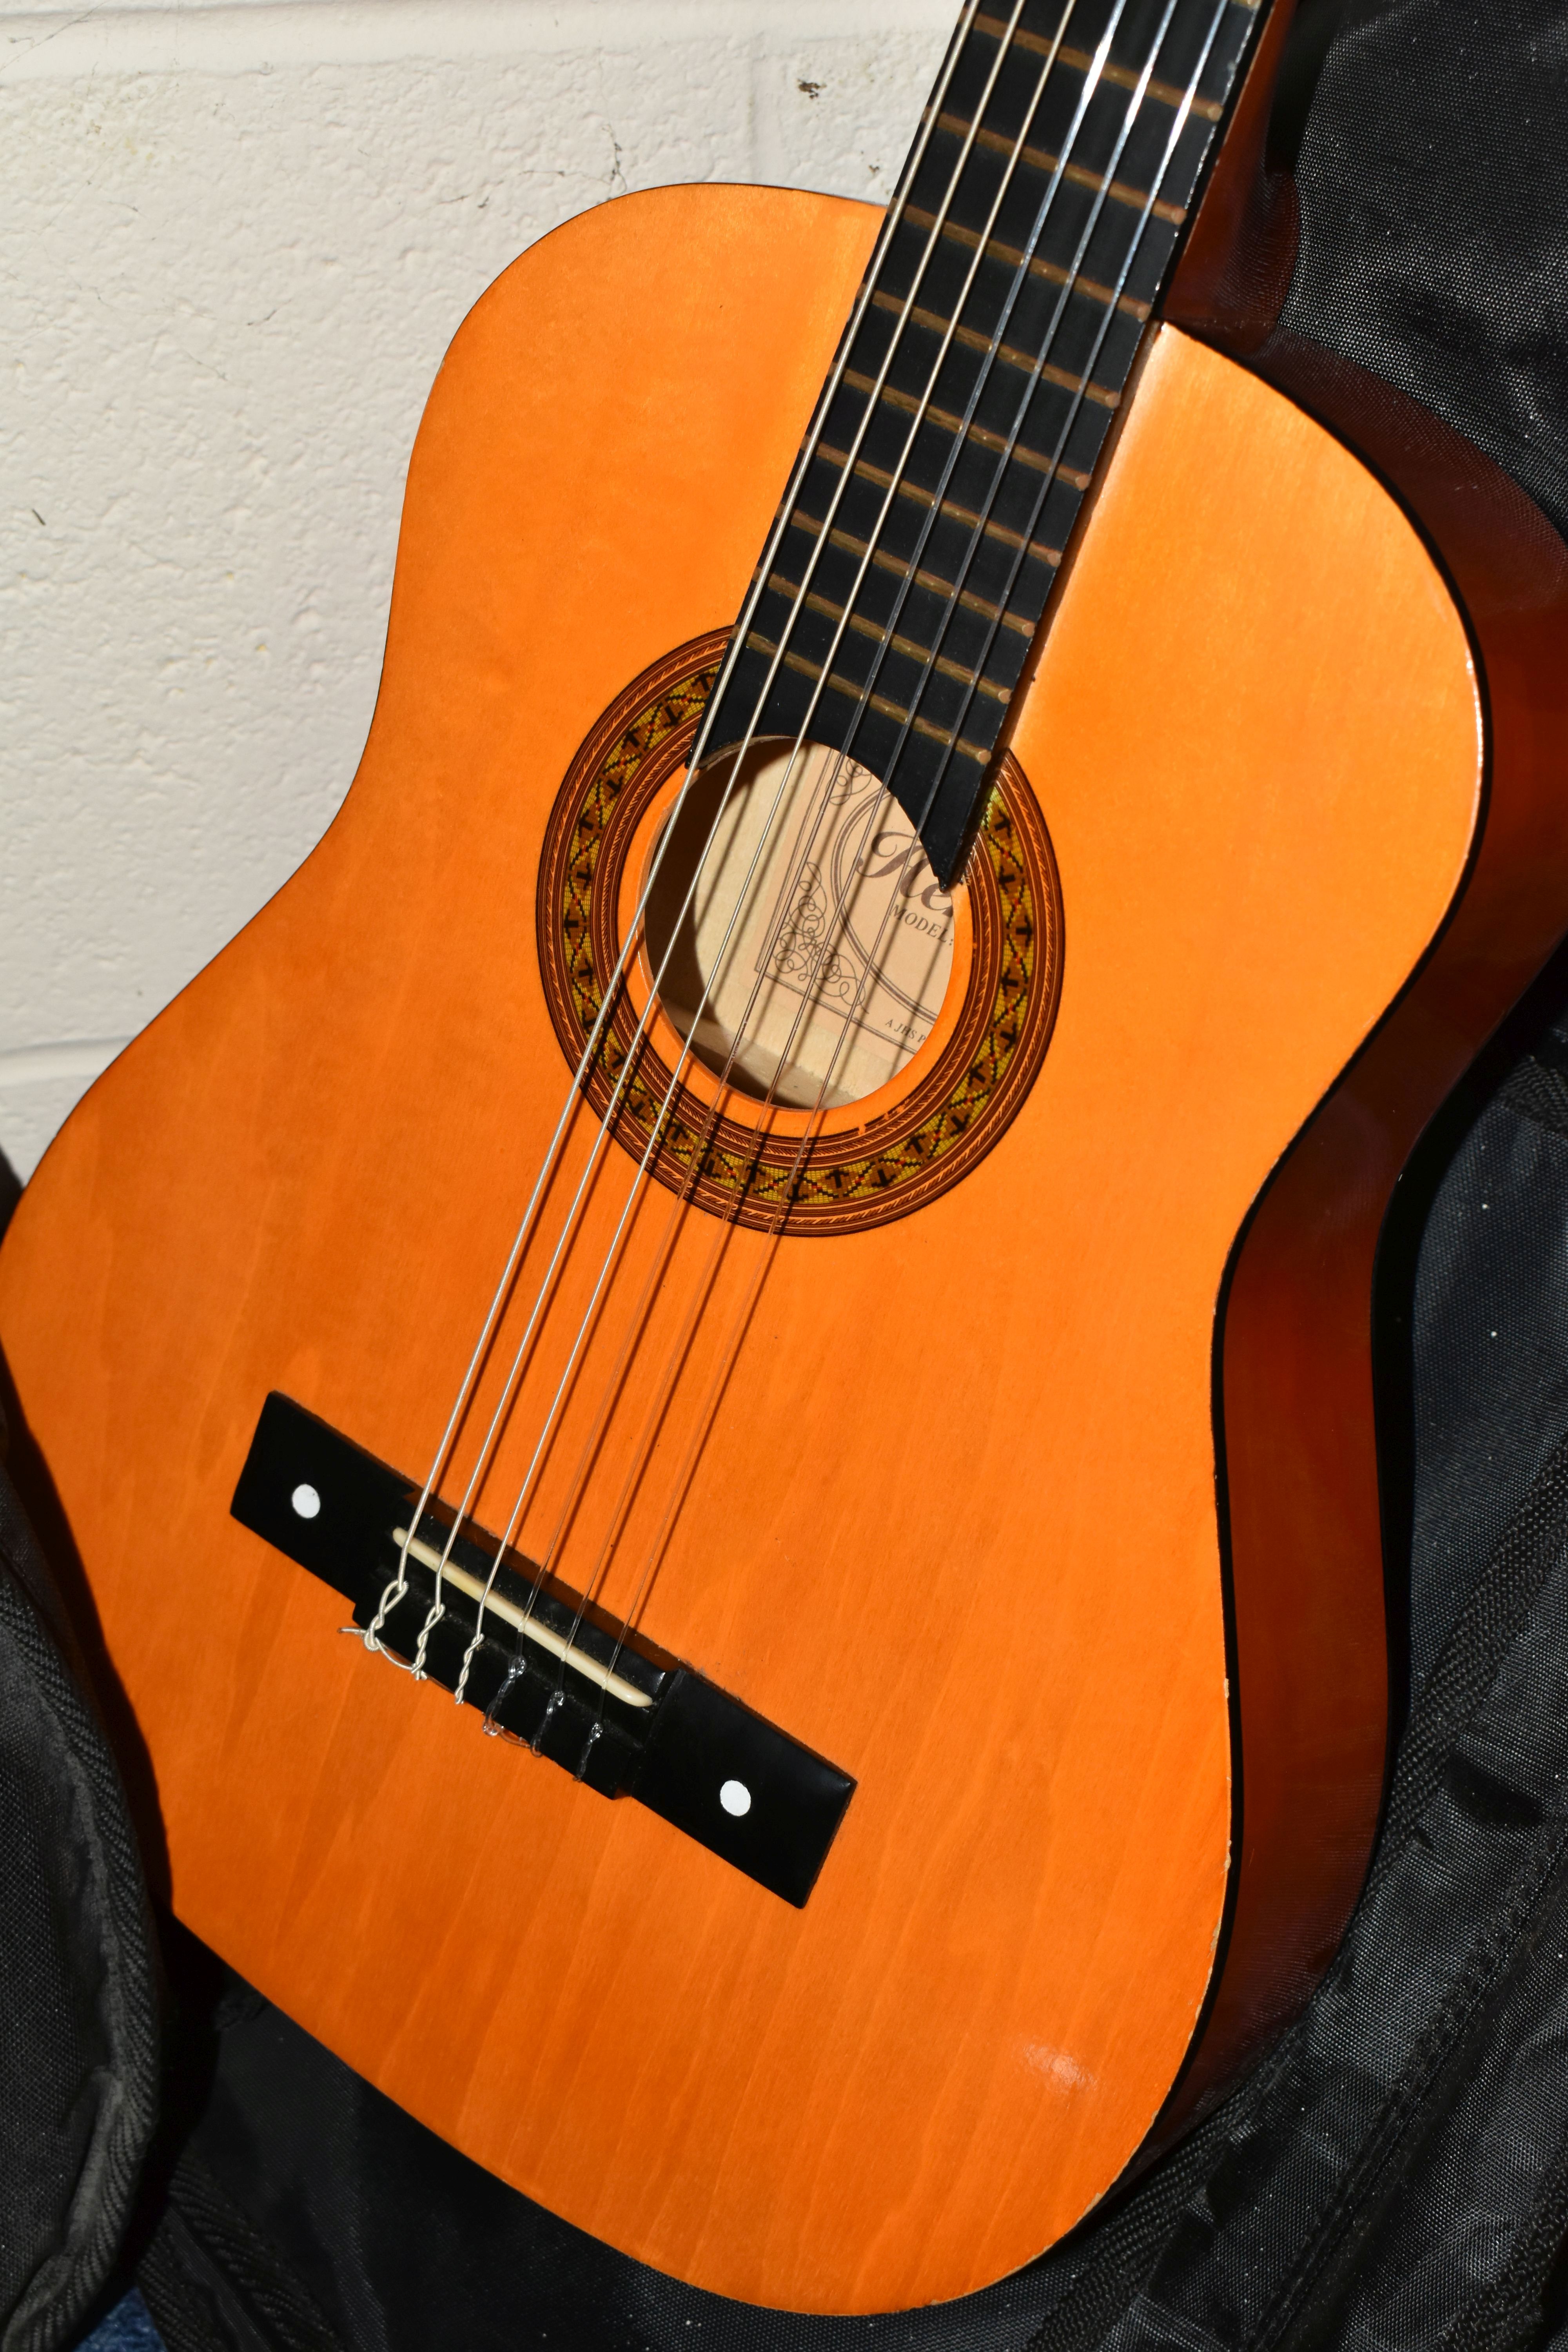 A 'VINTAGE' BANJO AND CHILD'S ACOUSTIC GUITAR, comprising a six string banjo with a soft case and - Image 5 of 8